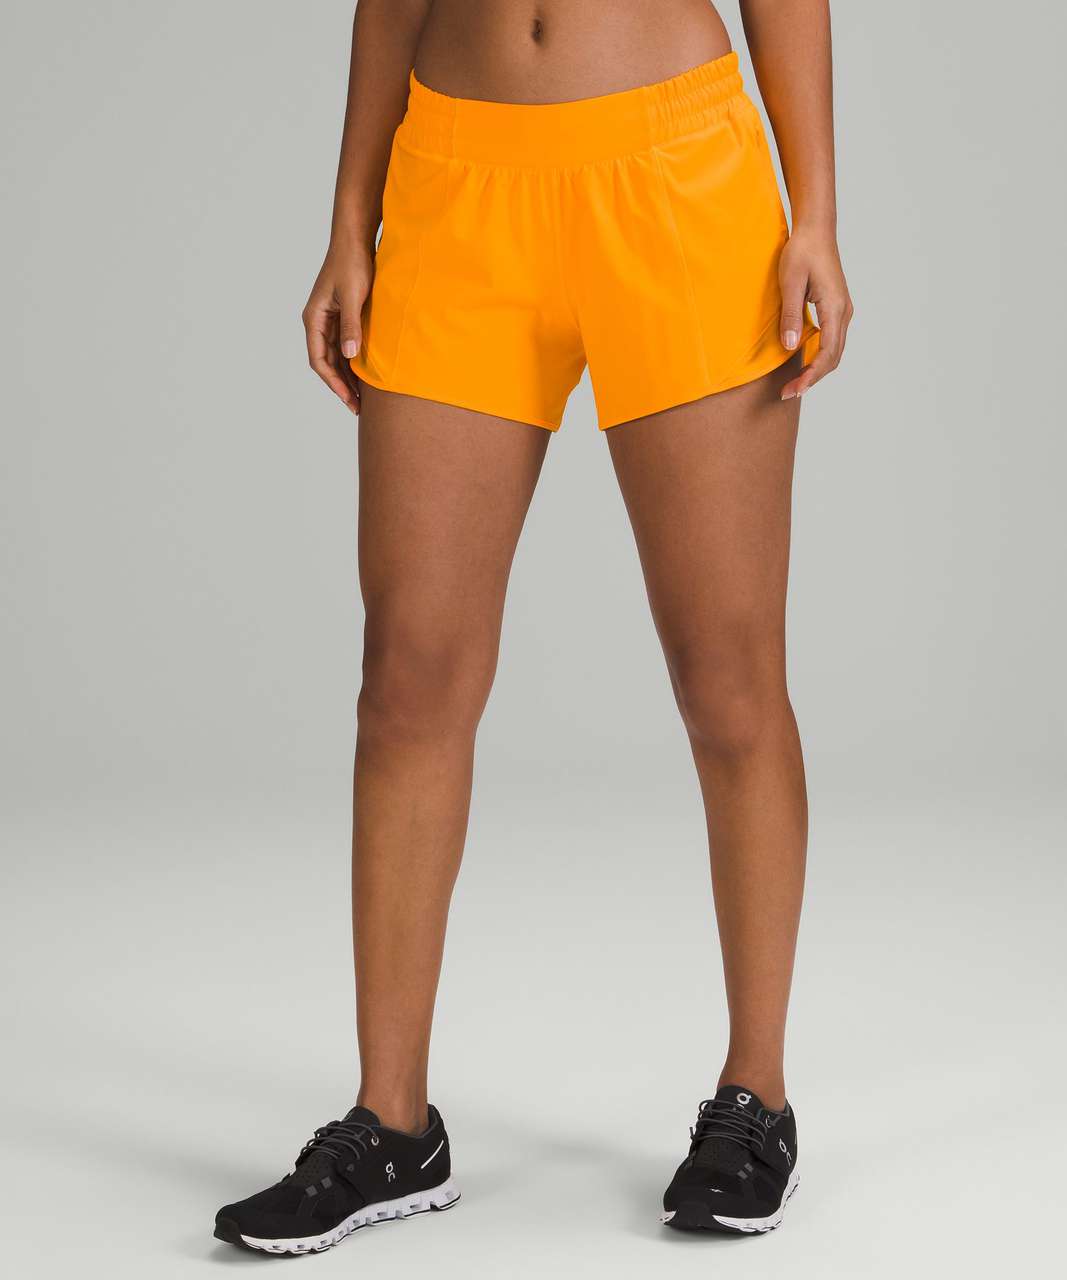 Lululemon Hotty Hot Low-Rise Lined Short 4" - Clementine